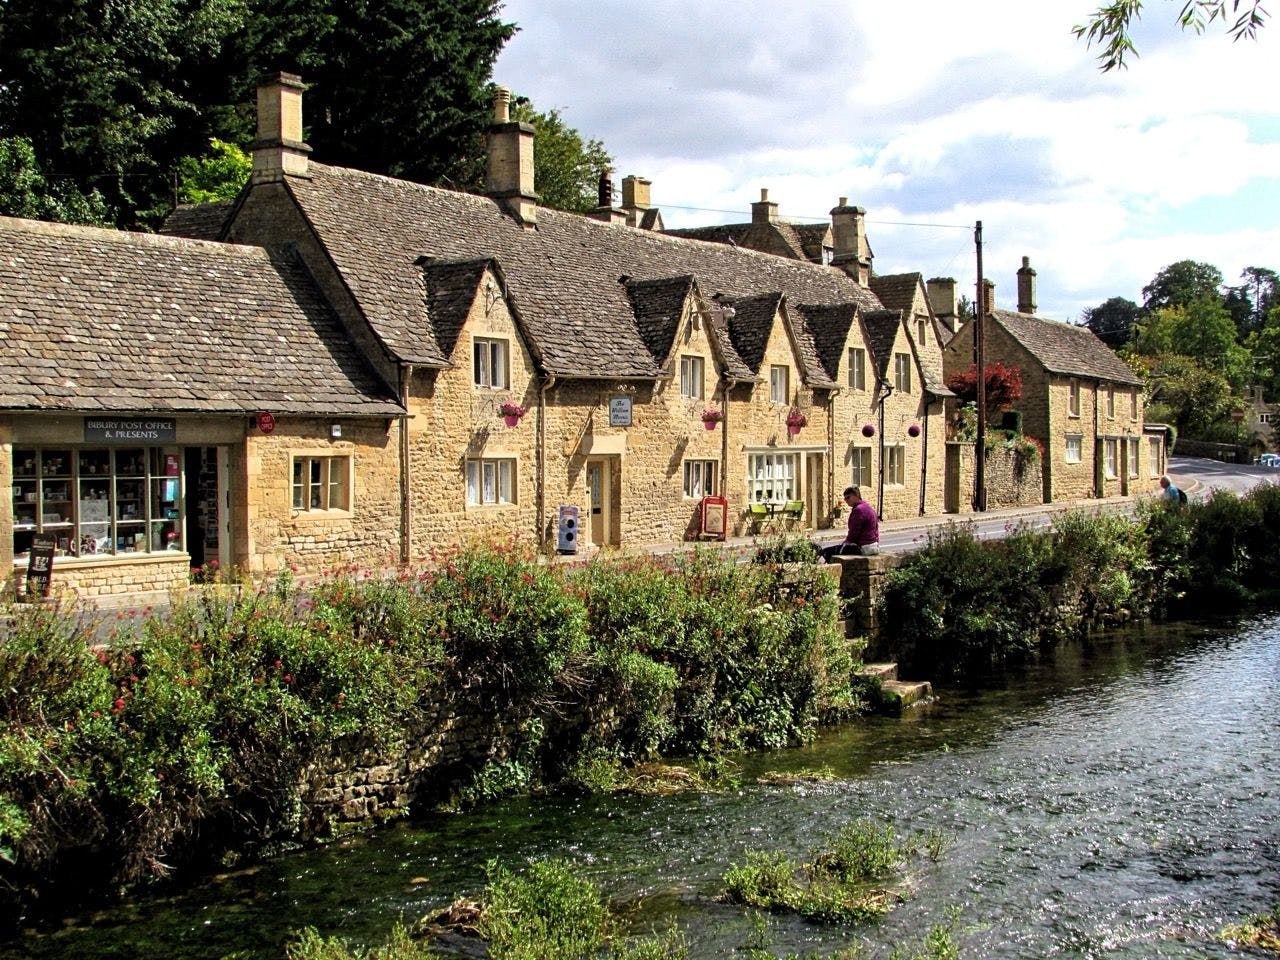 Picturesque houses in Cotswolds United Kingdom.